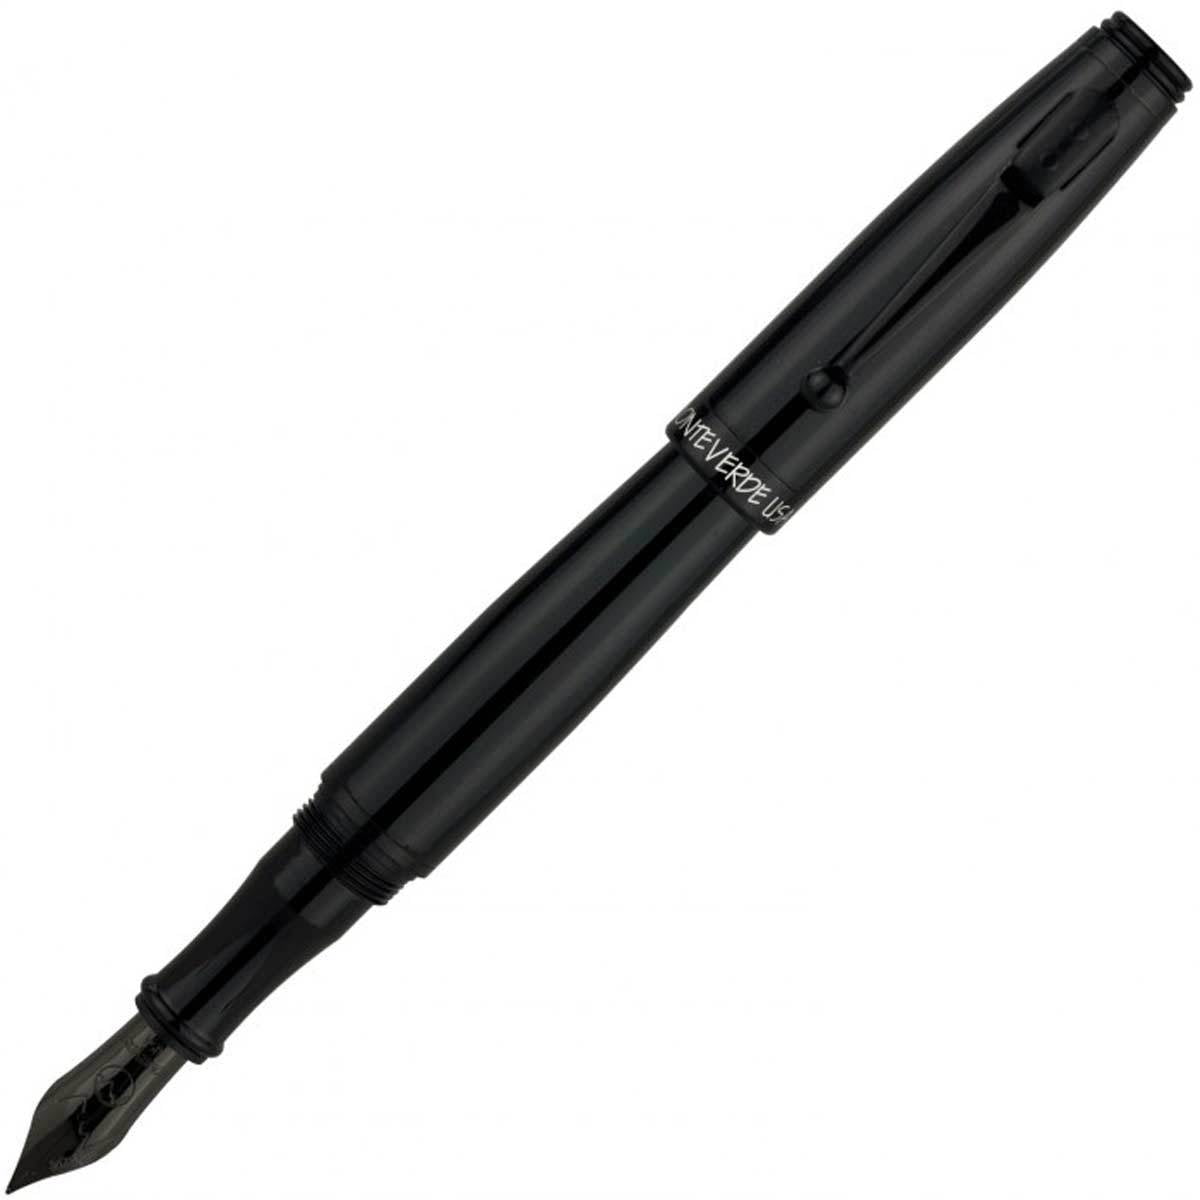 Wordsworth & Black Fountain Pen, Fine Point Ink Pens, Black Gold -  Refillable, Calligraphy